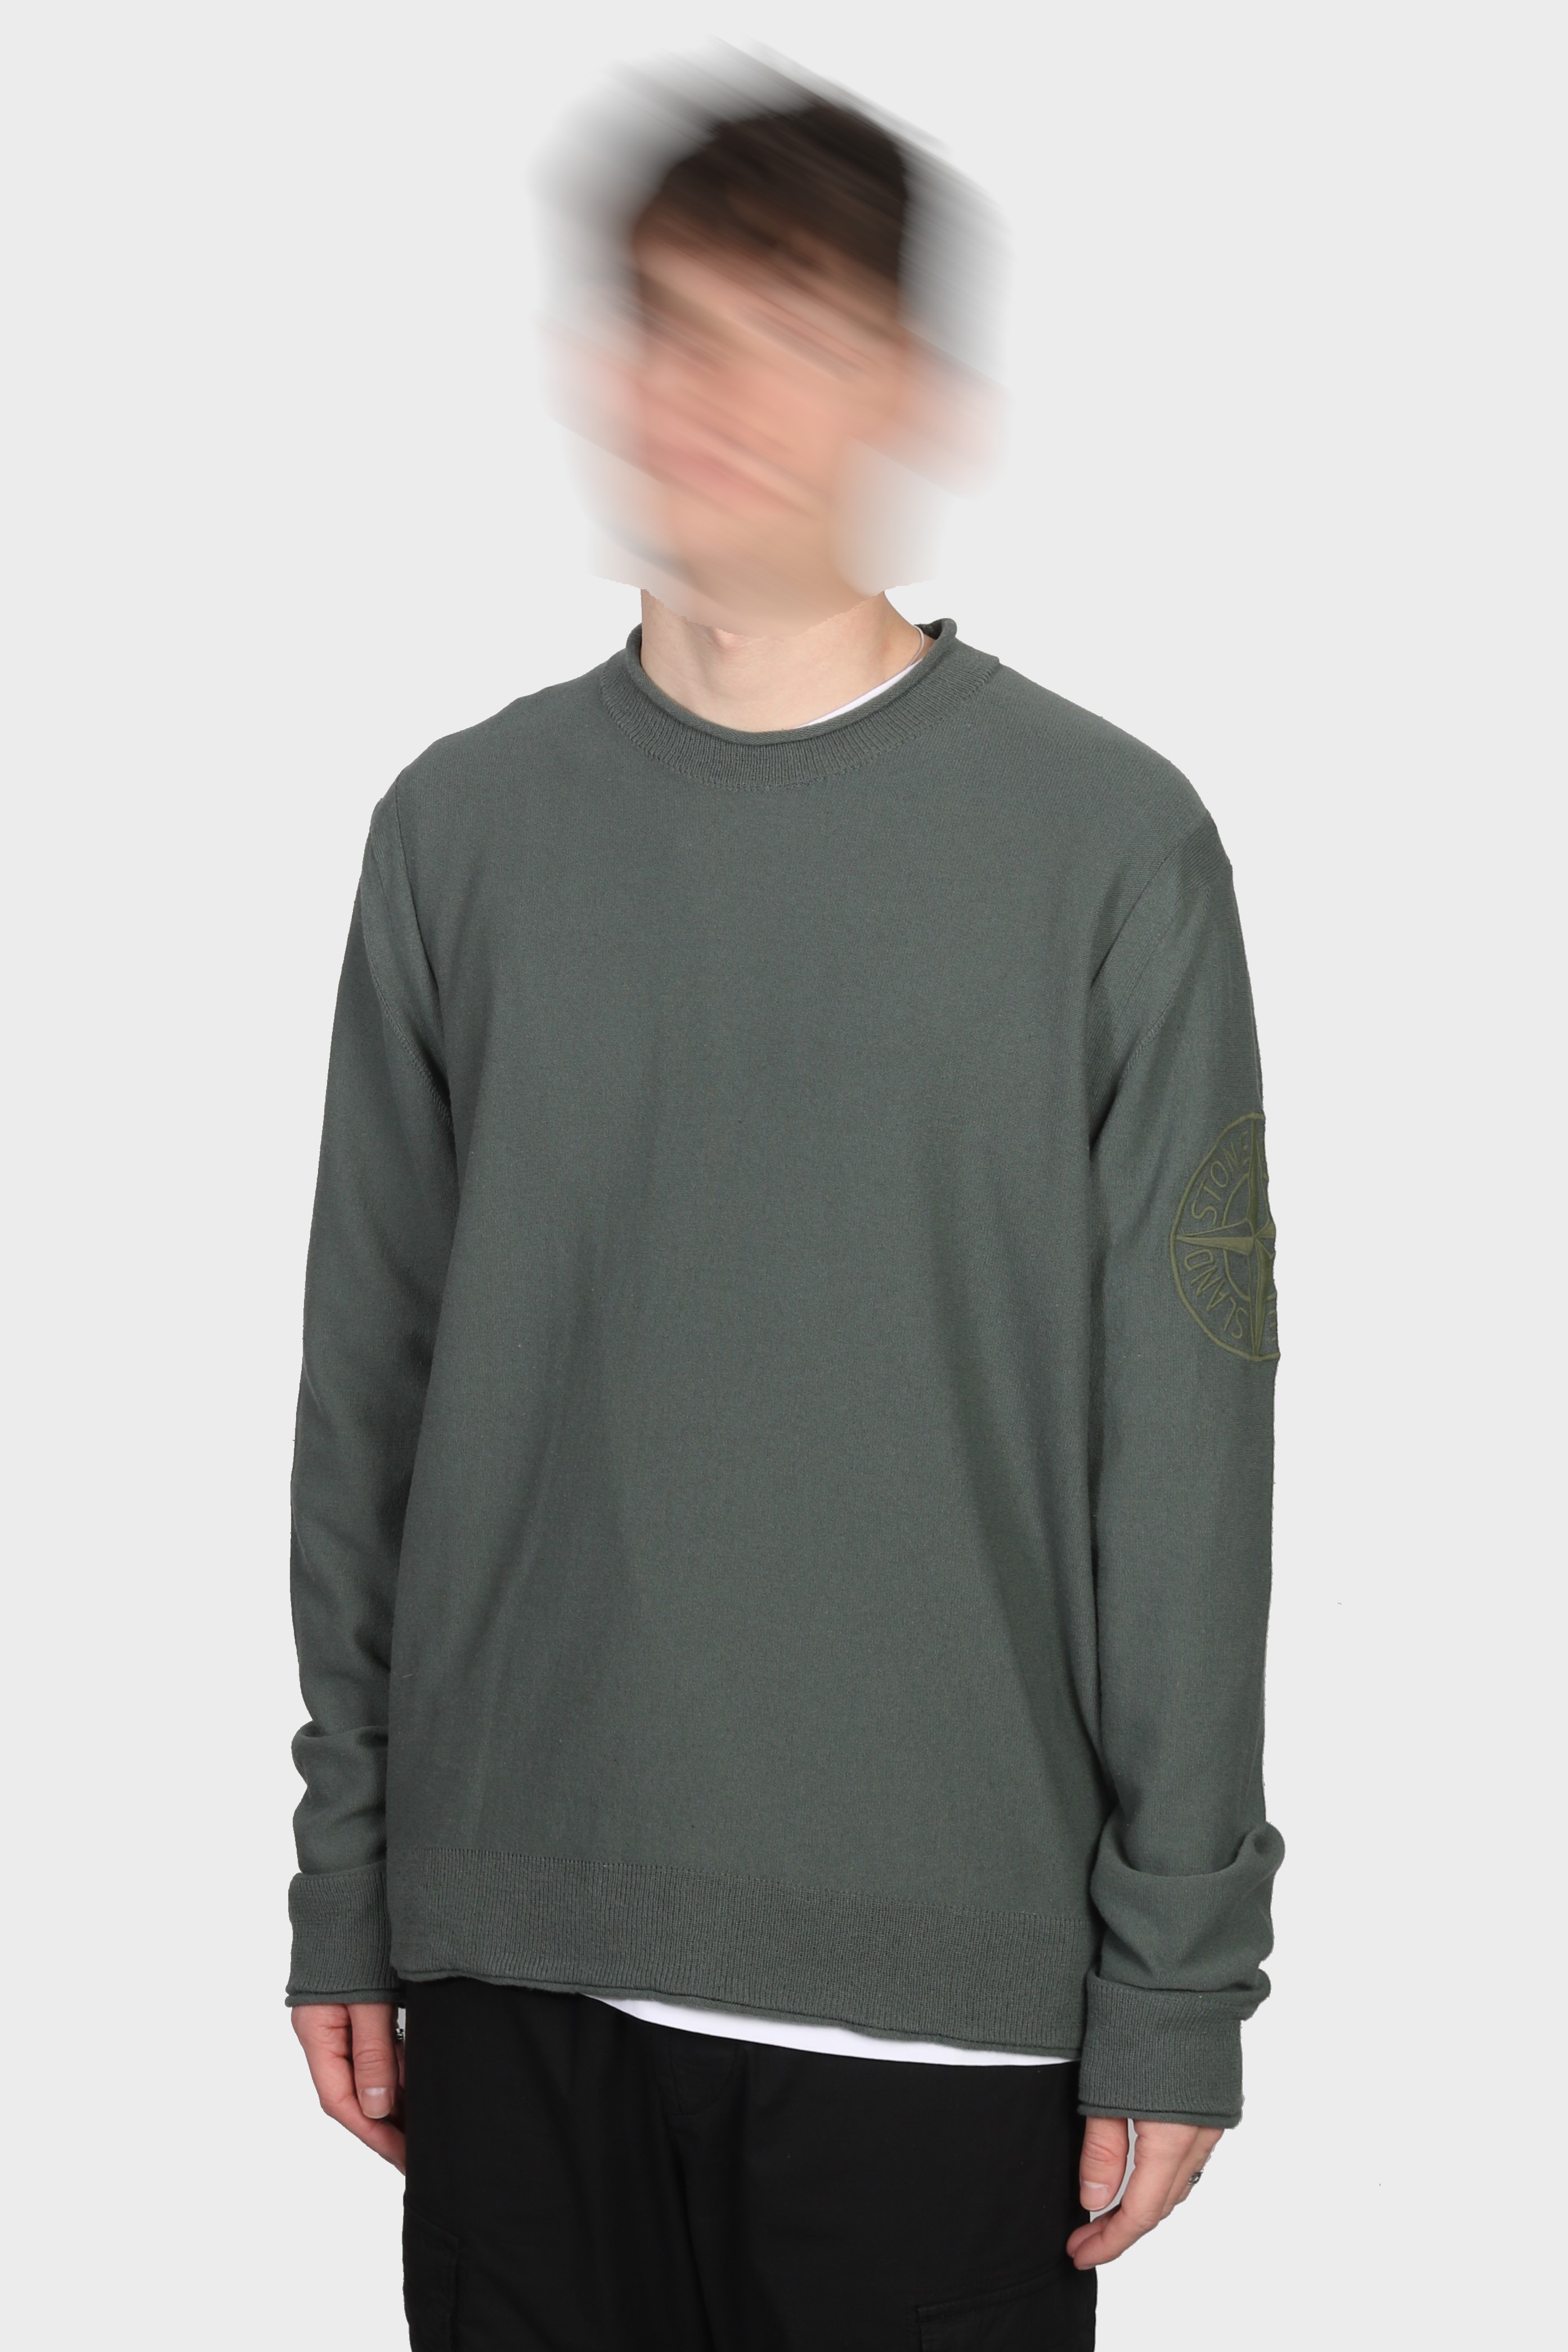 STONE ISLAND Cotton Knit Pullover in Green 2XL